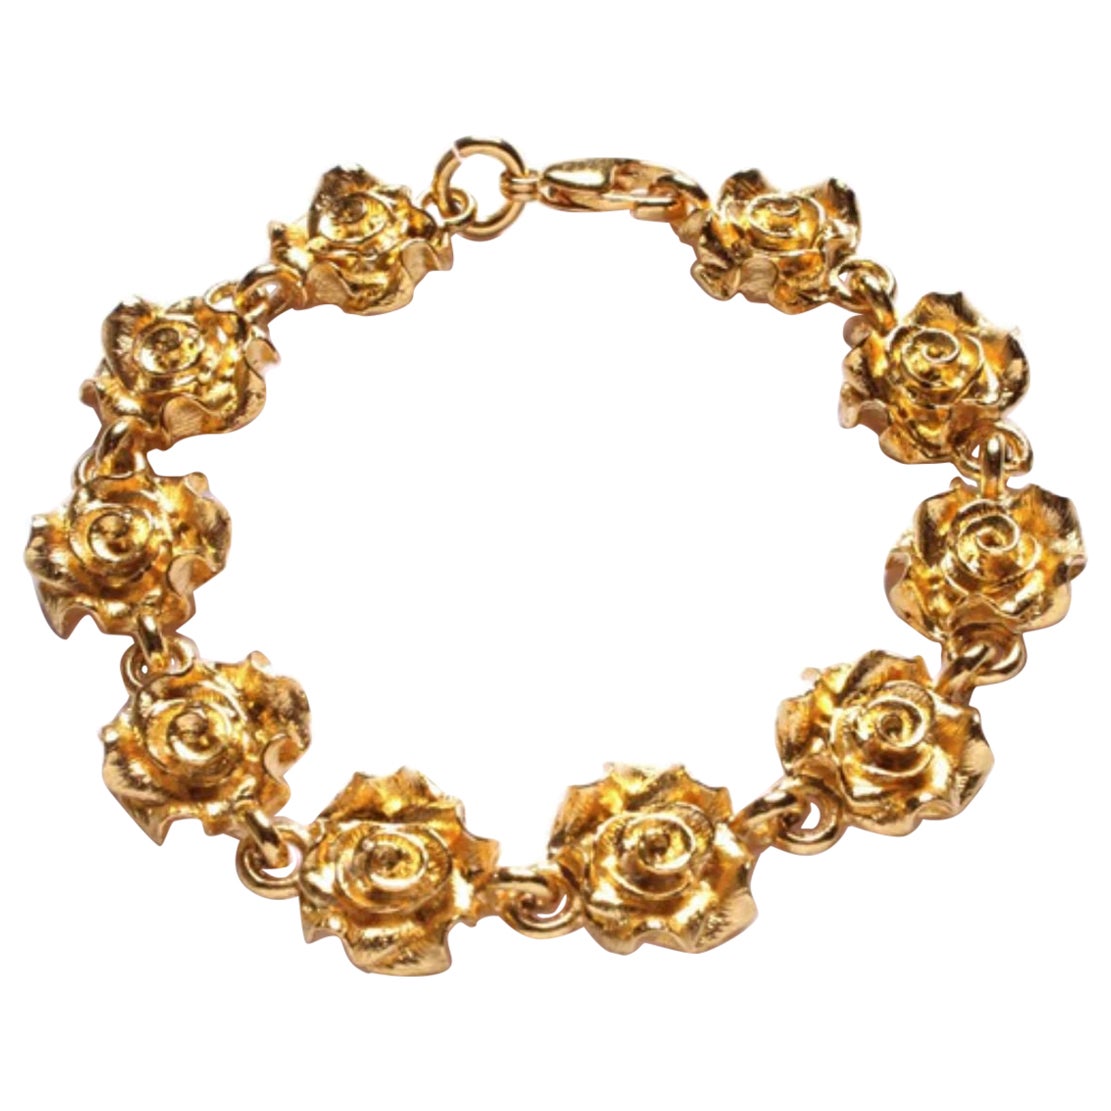 24K Yellow Gold Plated Sterling Silver Rosette Chain Bracelet For Sale